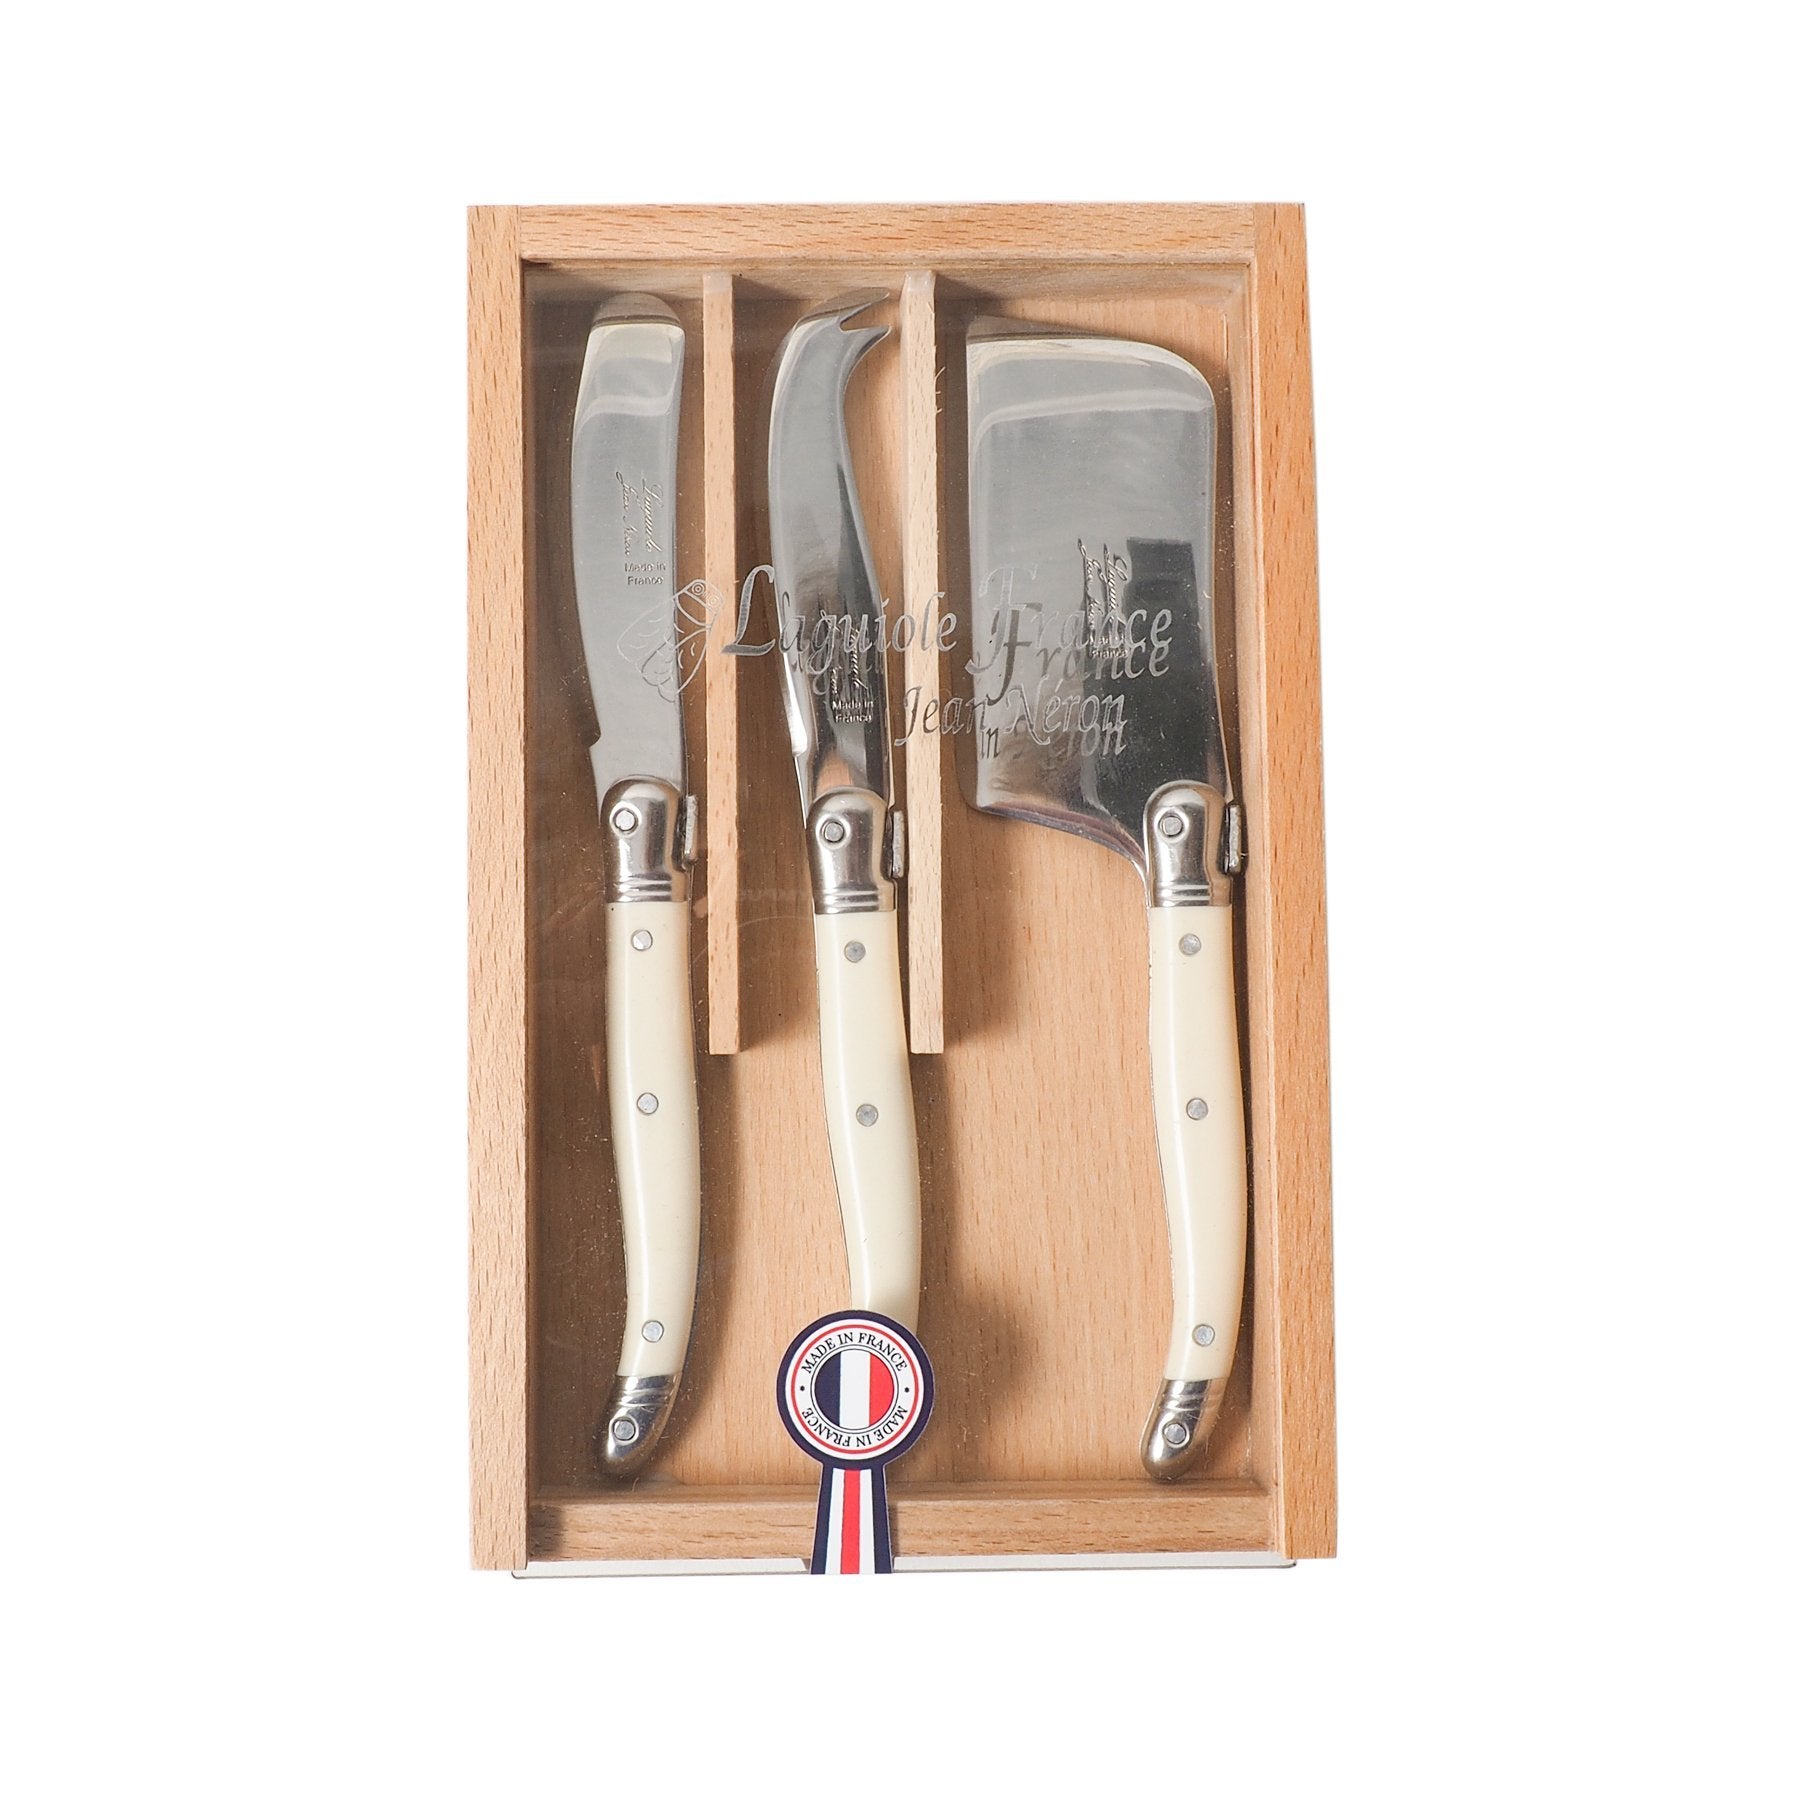 Laguiole 3 Piece Ivory Mini Cheese Set in Wooden Box - French Dry Goods